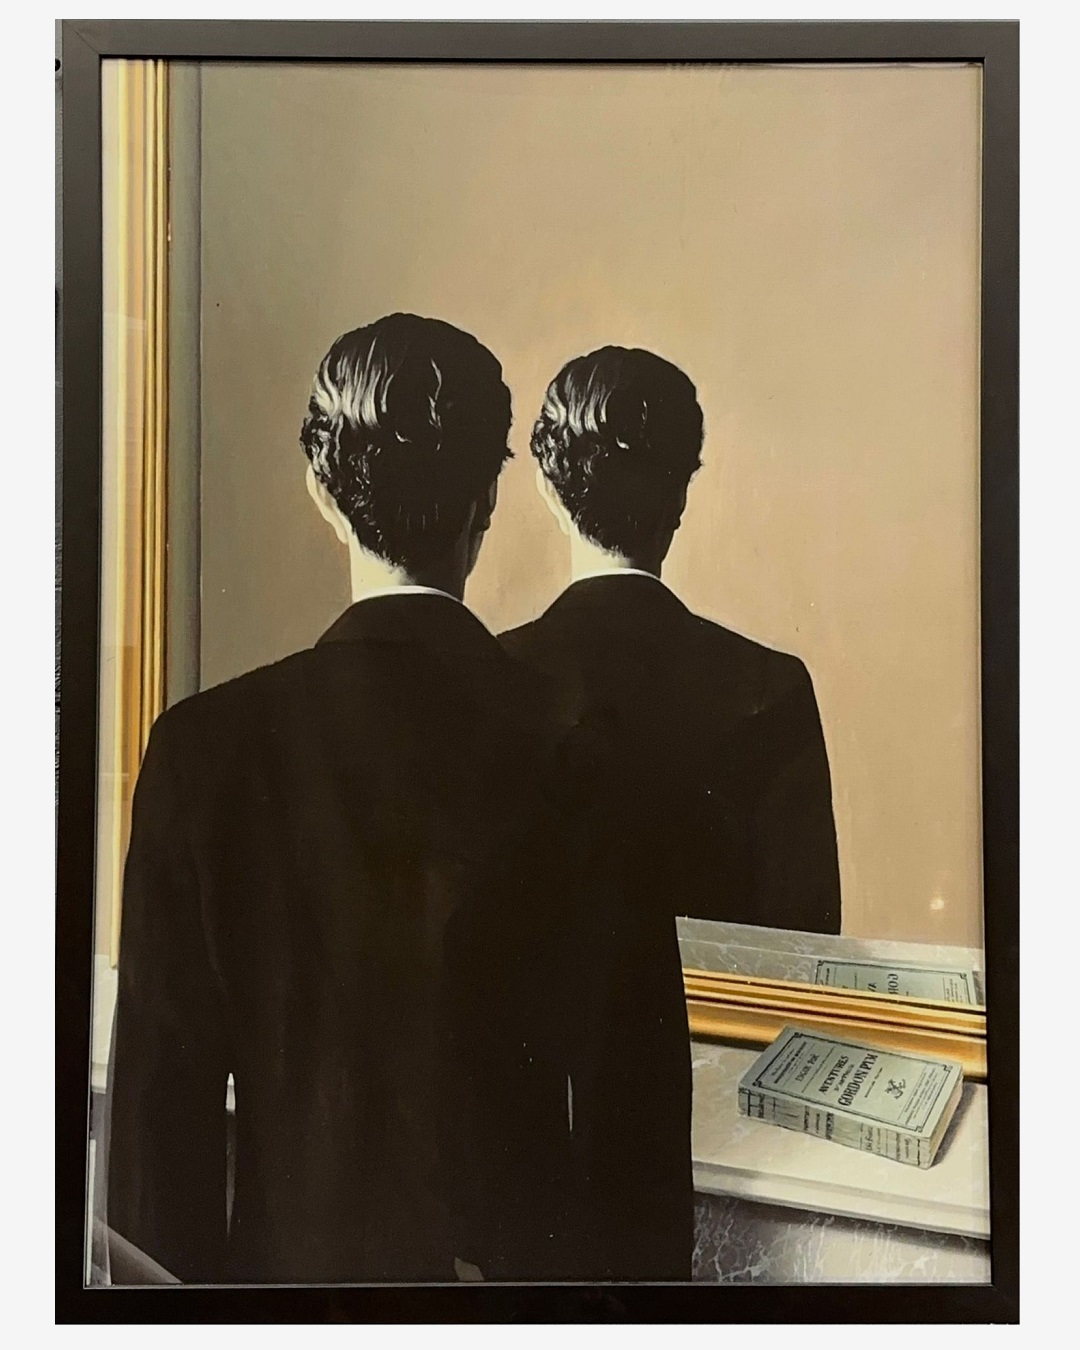 Framed canvas print of man looking in the mirror